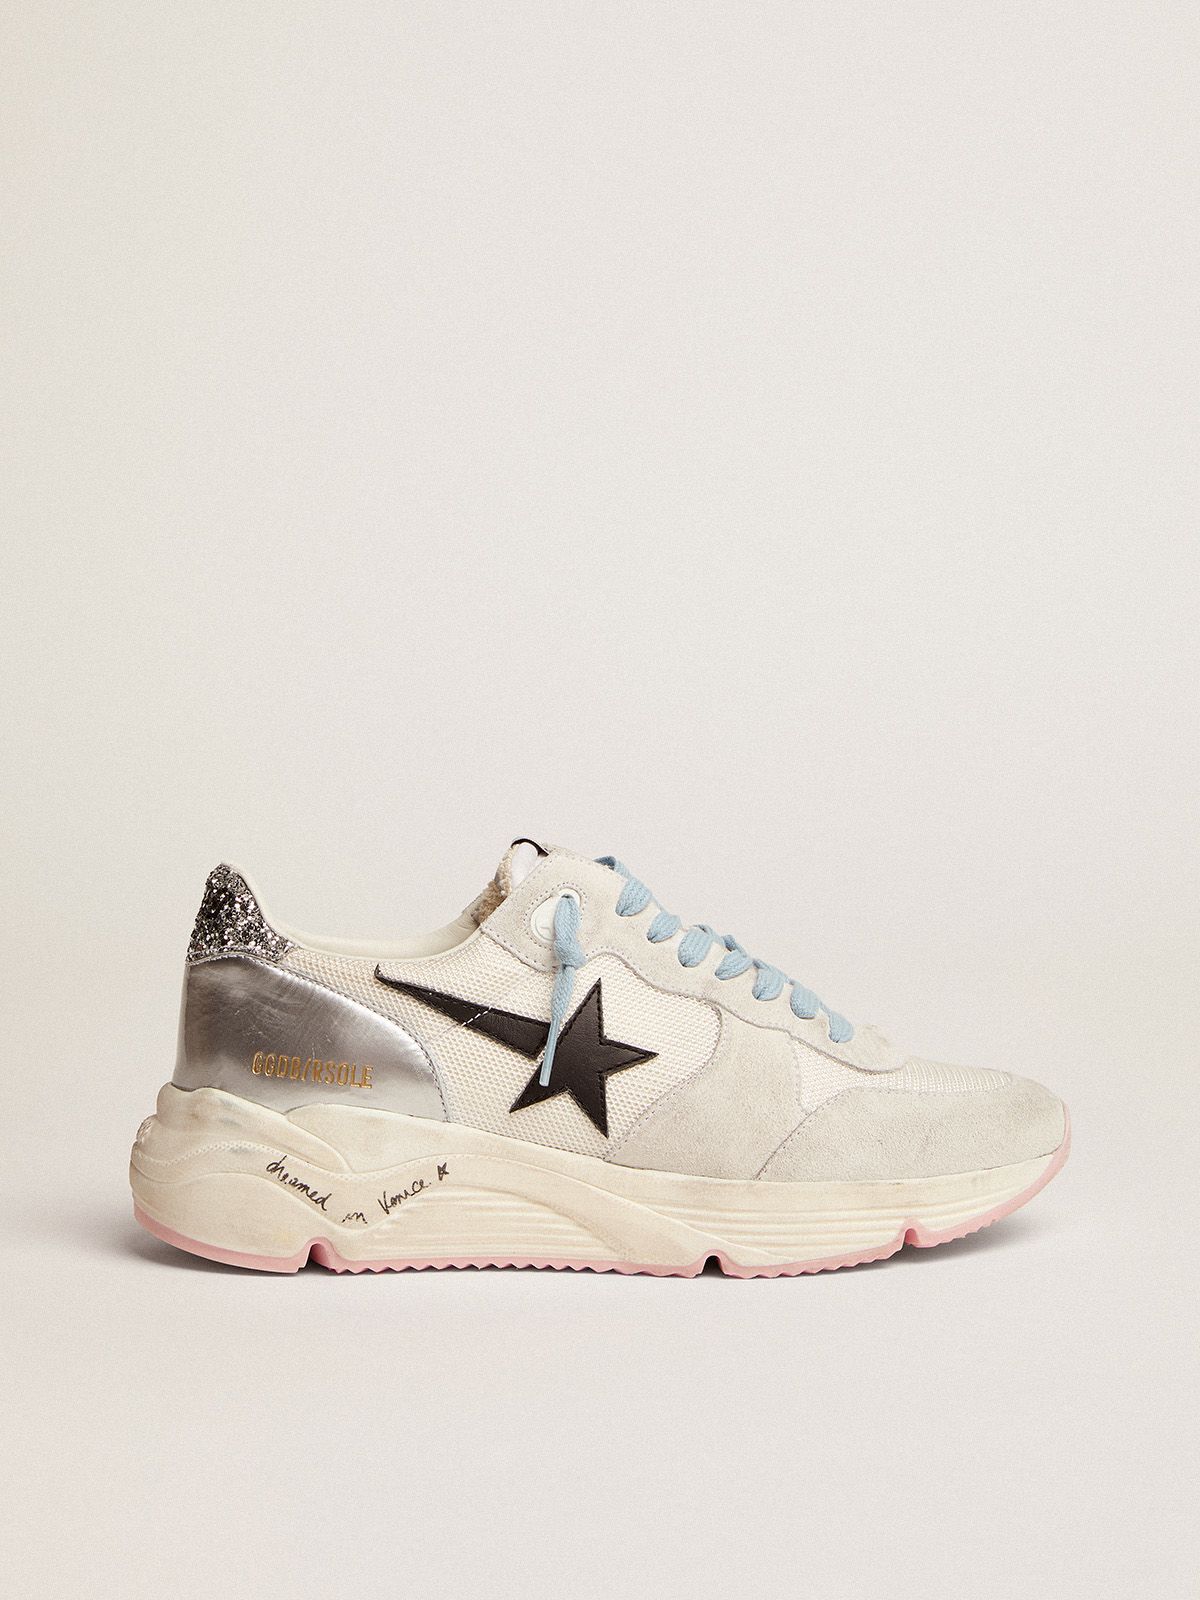 golden goose star in leather glitter sneakers with Running LTD tab silver suede Sole black mesh heel and white